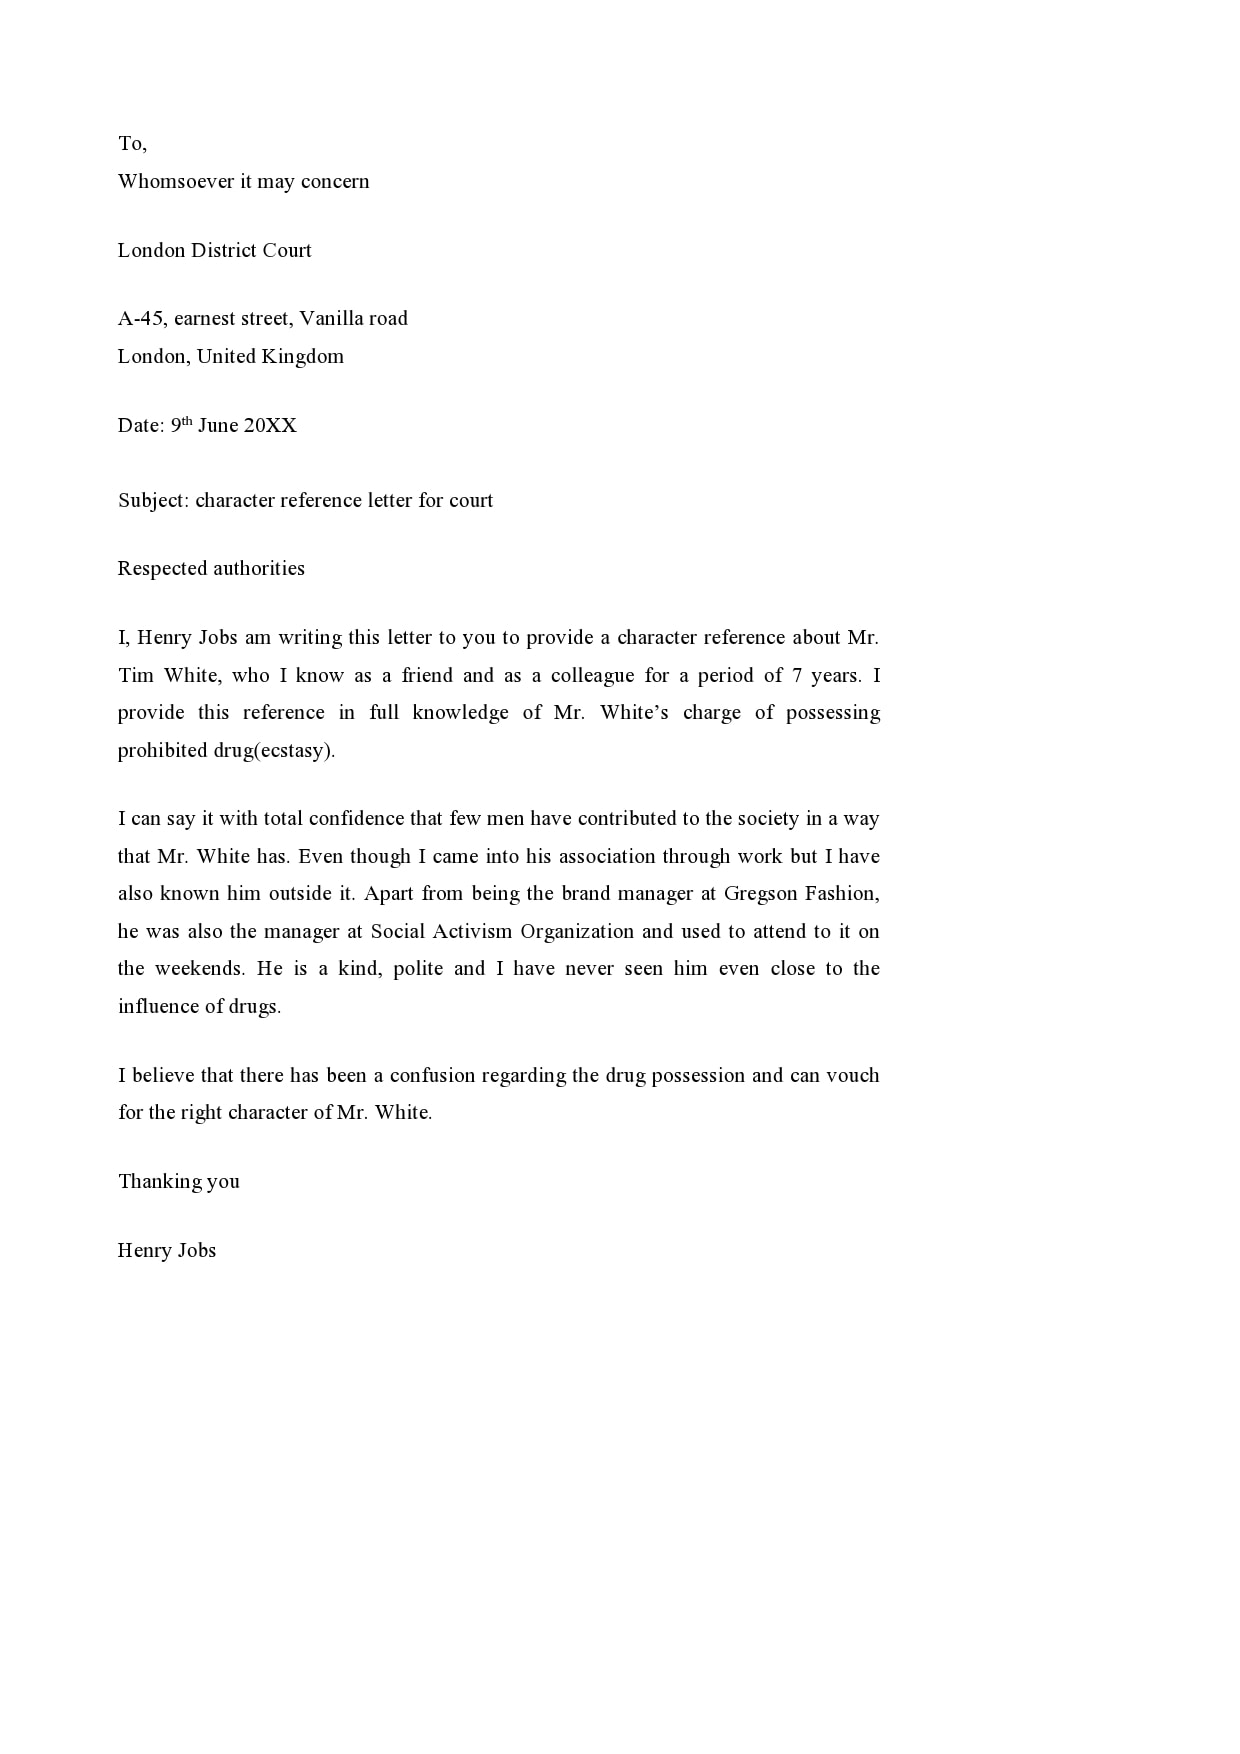 Work Reference Letter Template from templatearchive.com